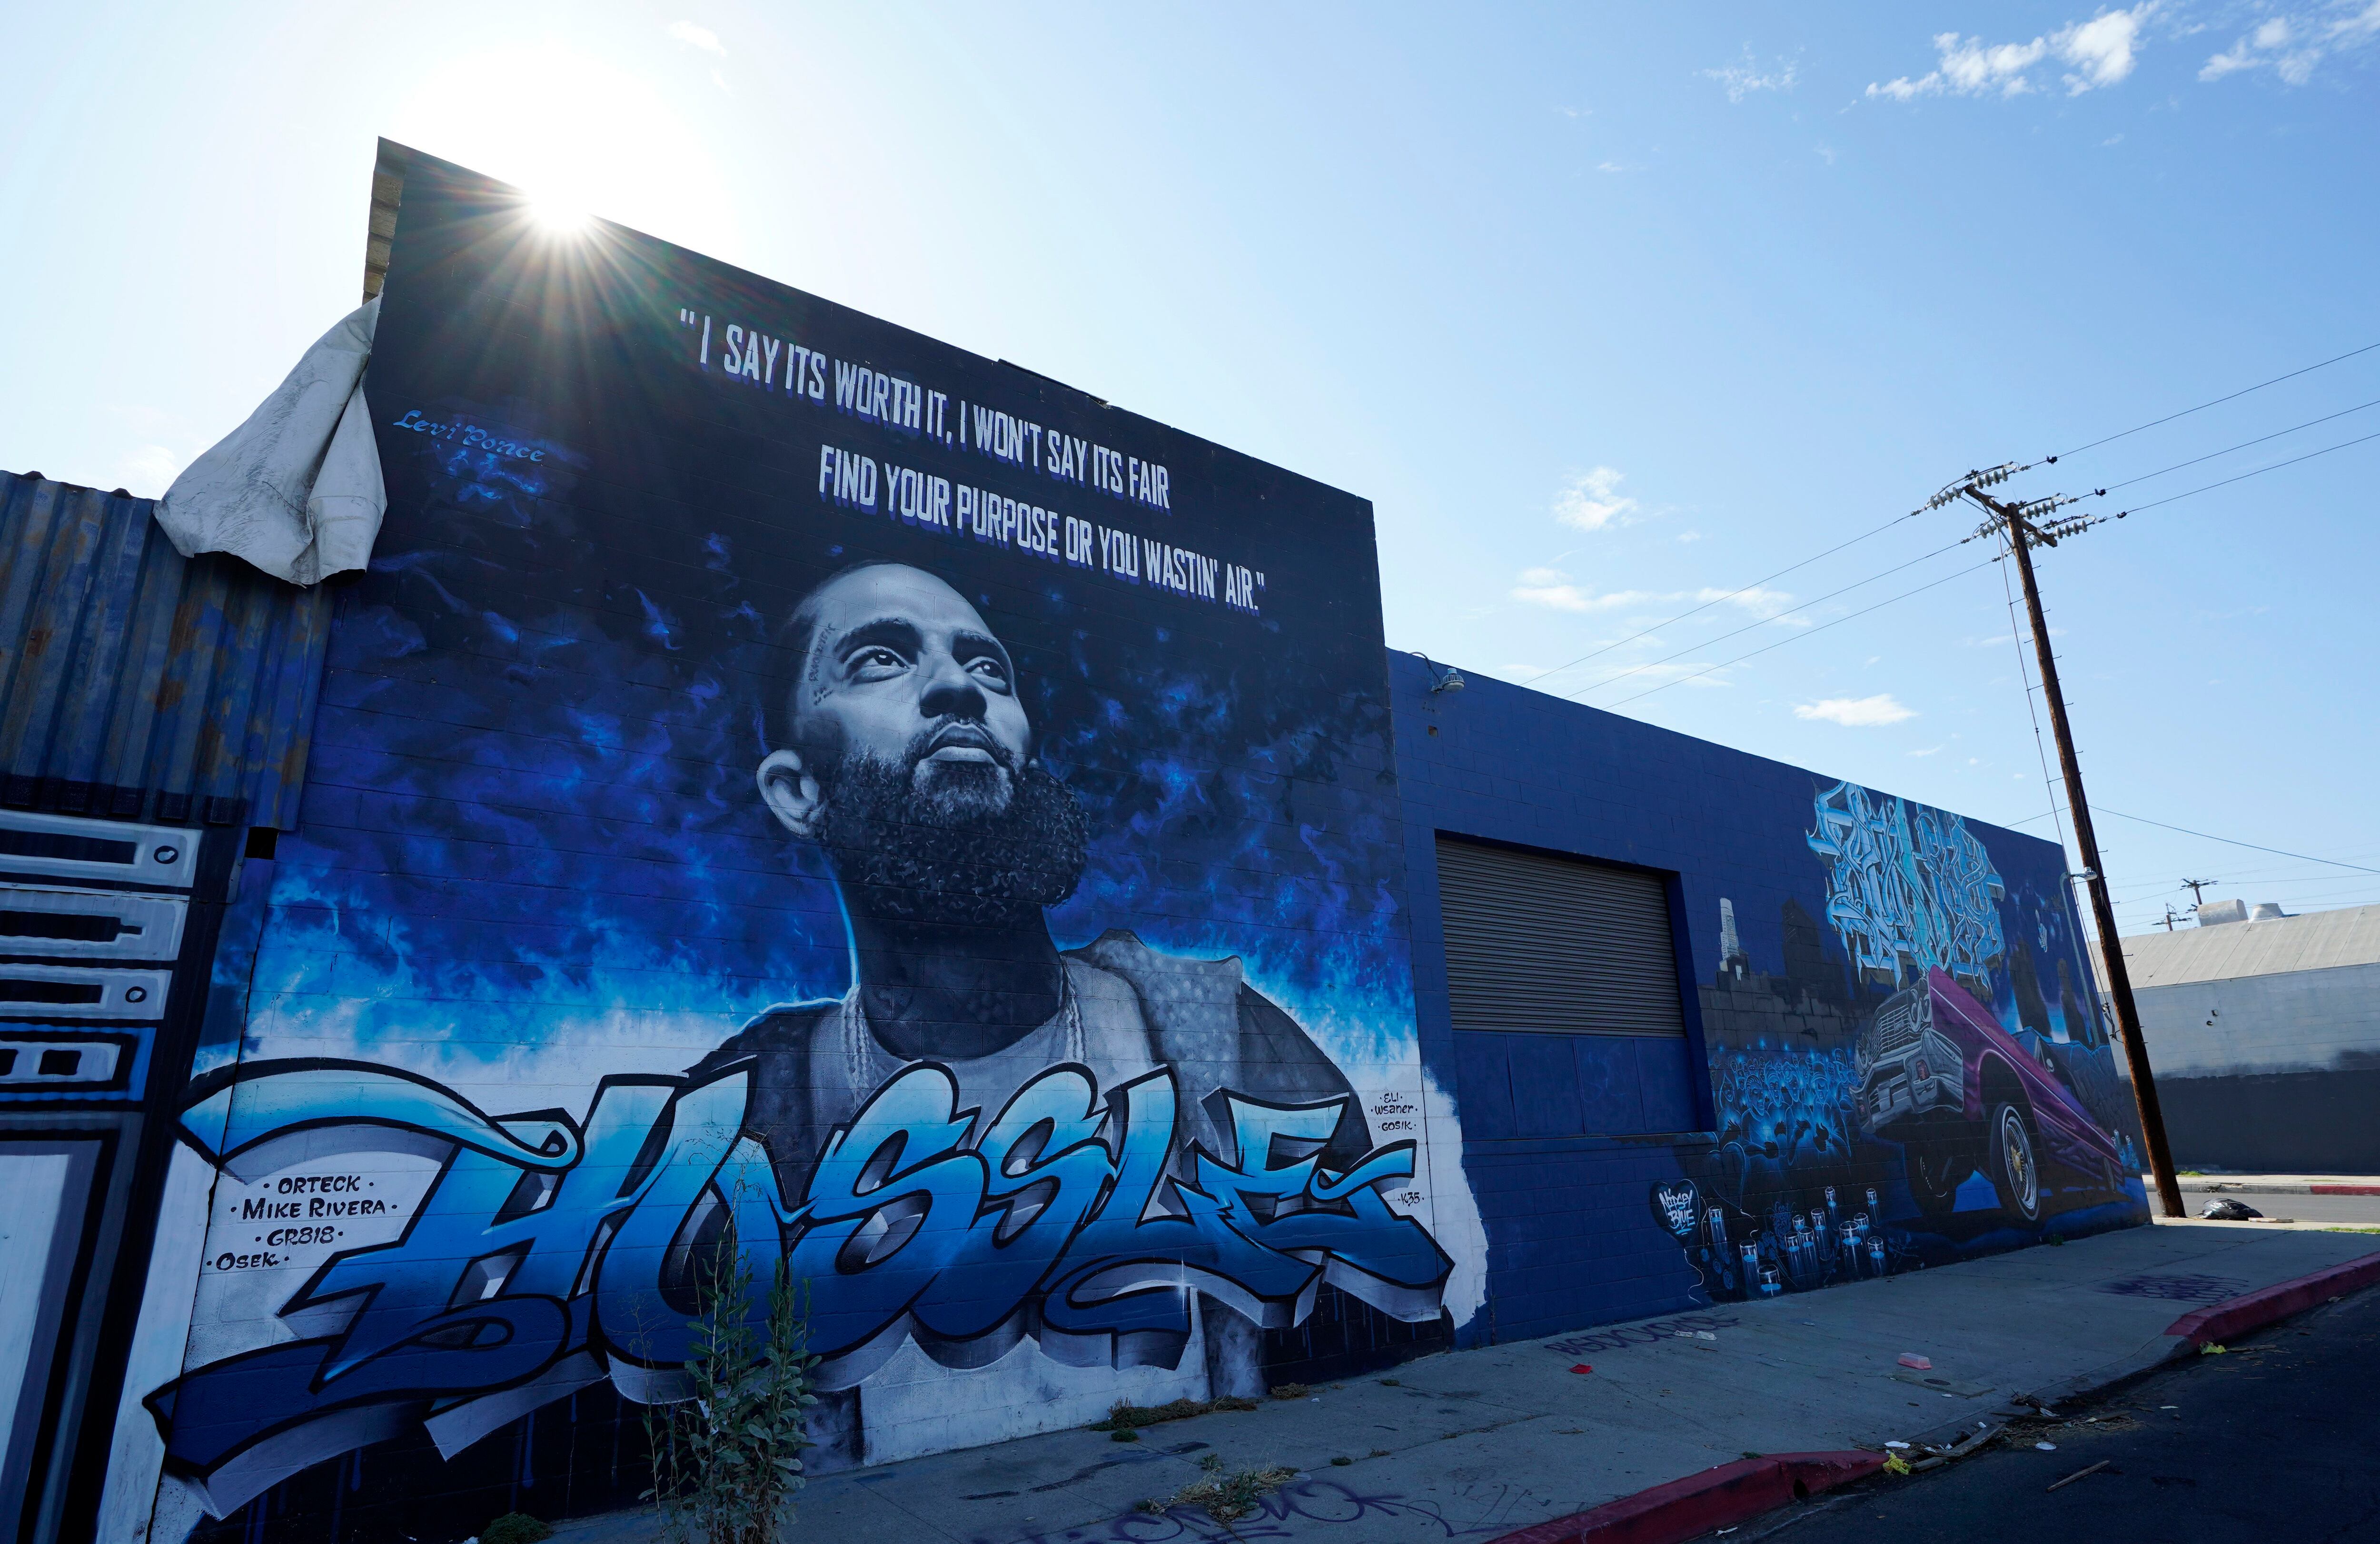 Nipsey Hussle’s legacy inspires 3 years after his murder